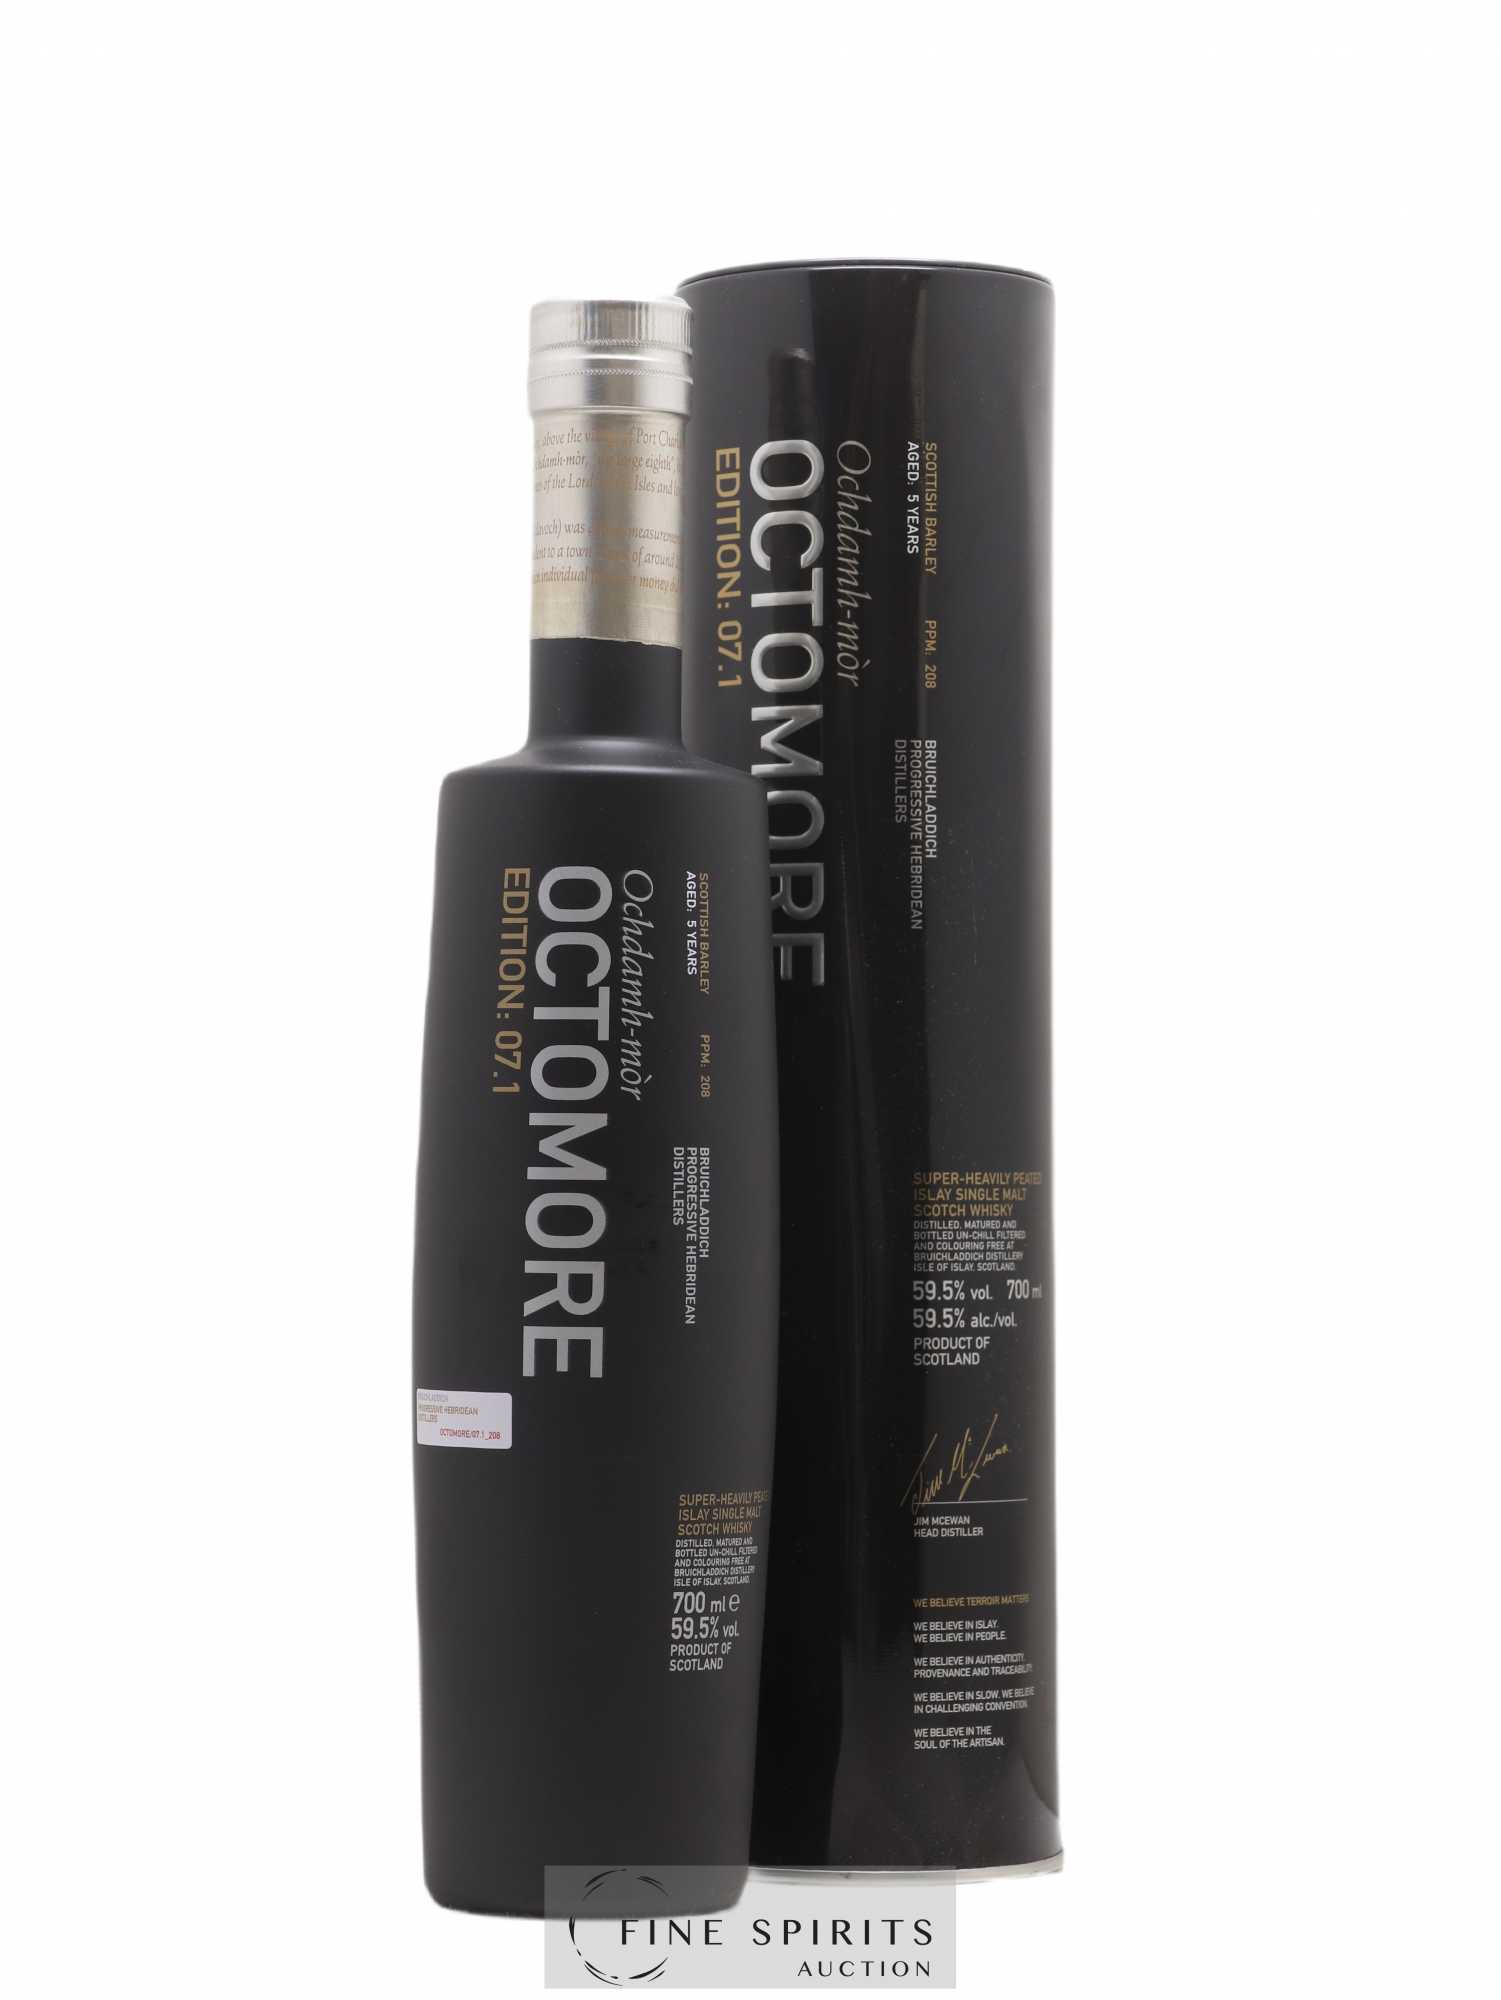 Octomore 5 years Of. Edition 07.1 Super-Heavily Peated Limited Edition 